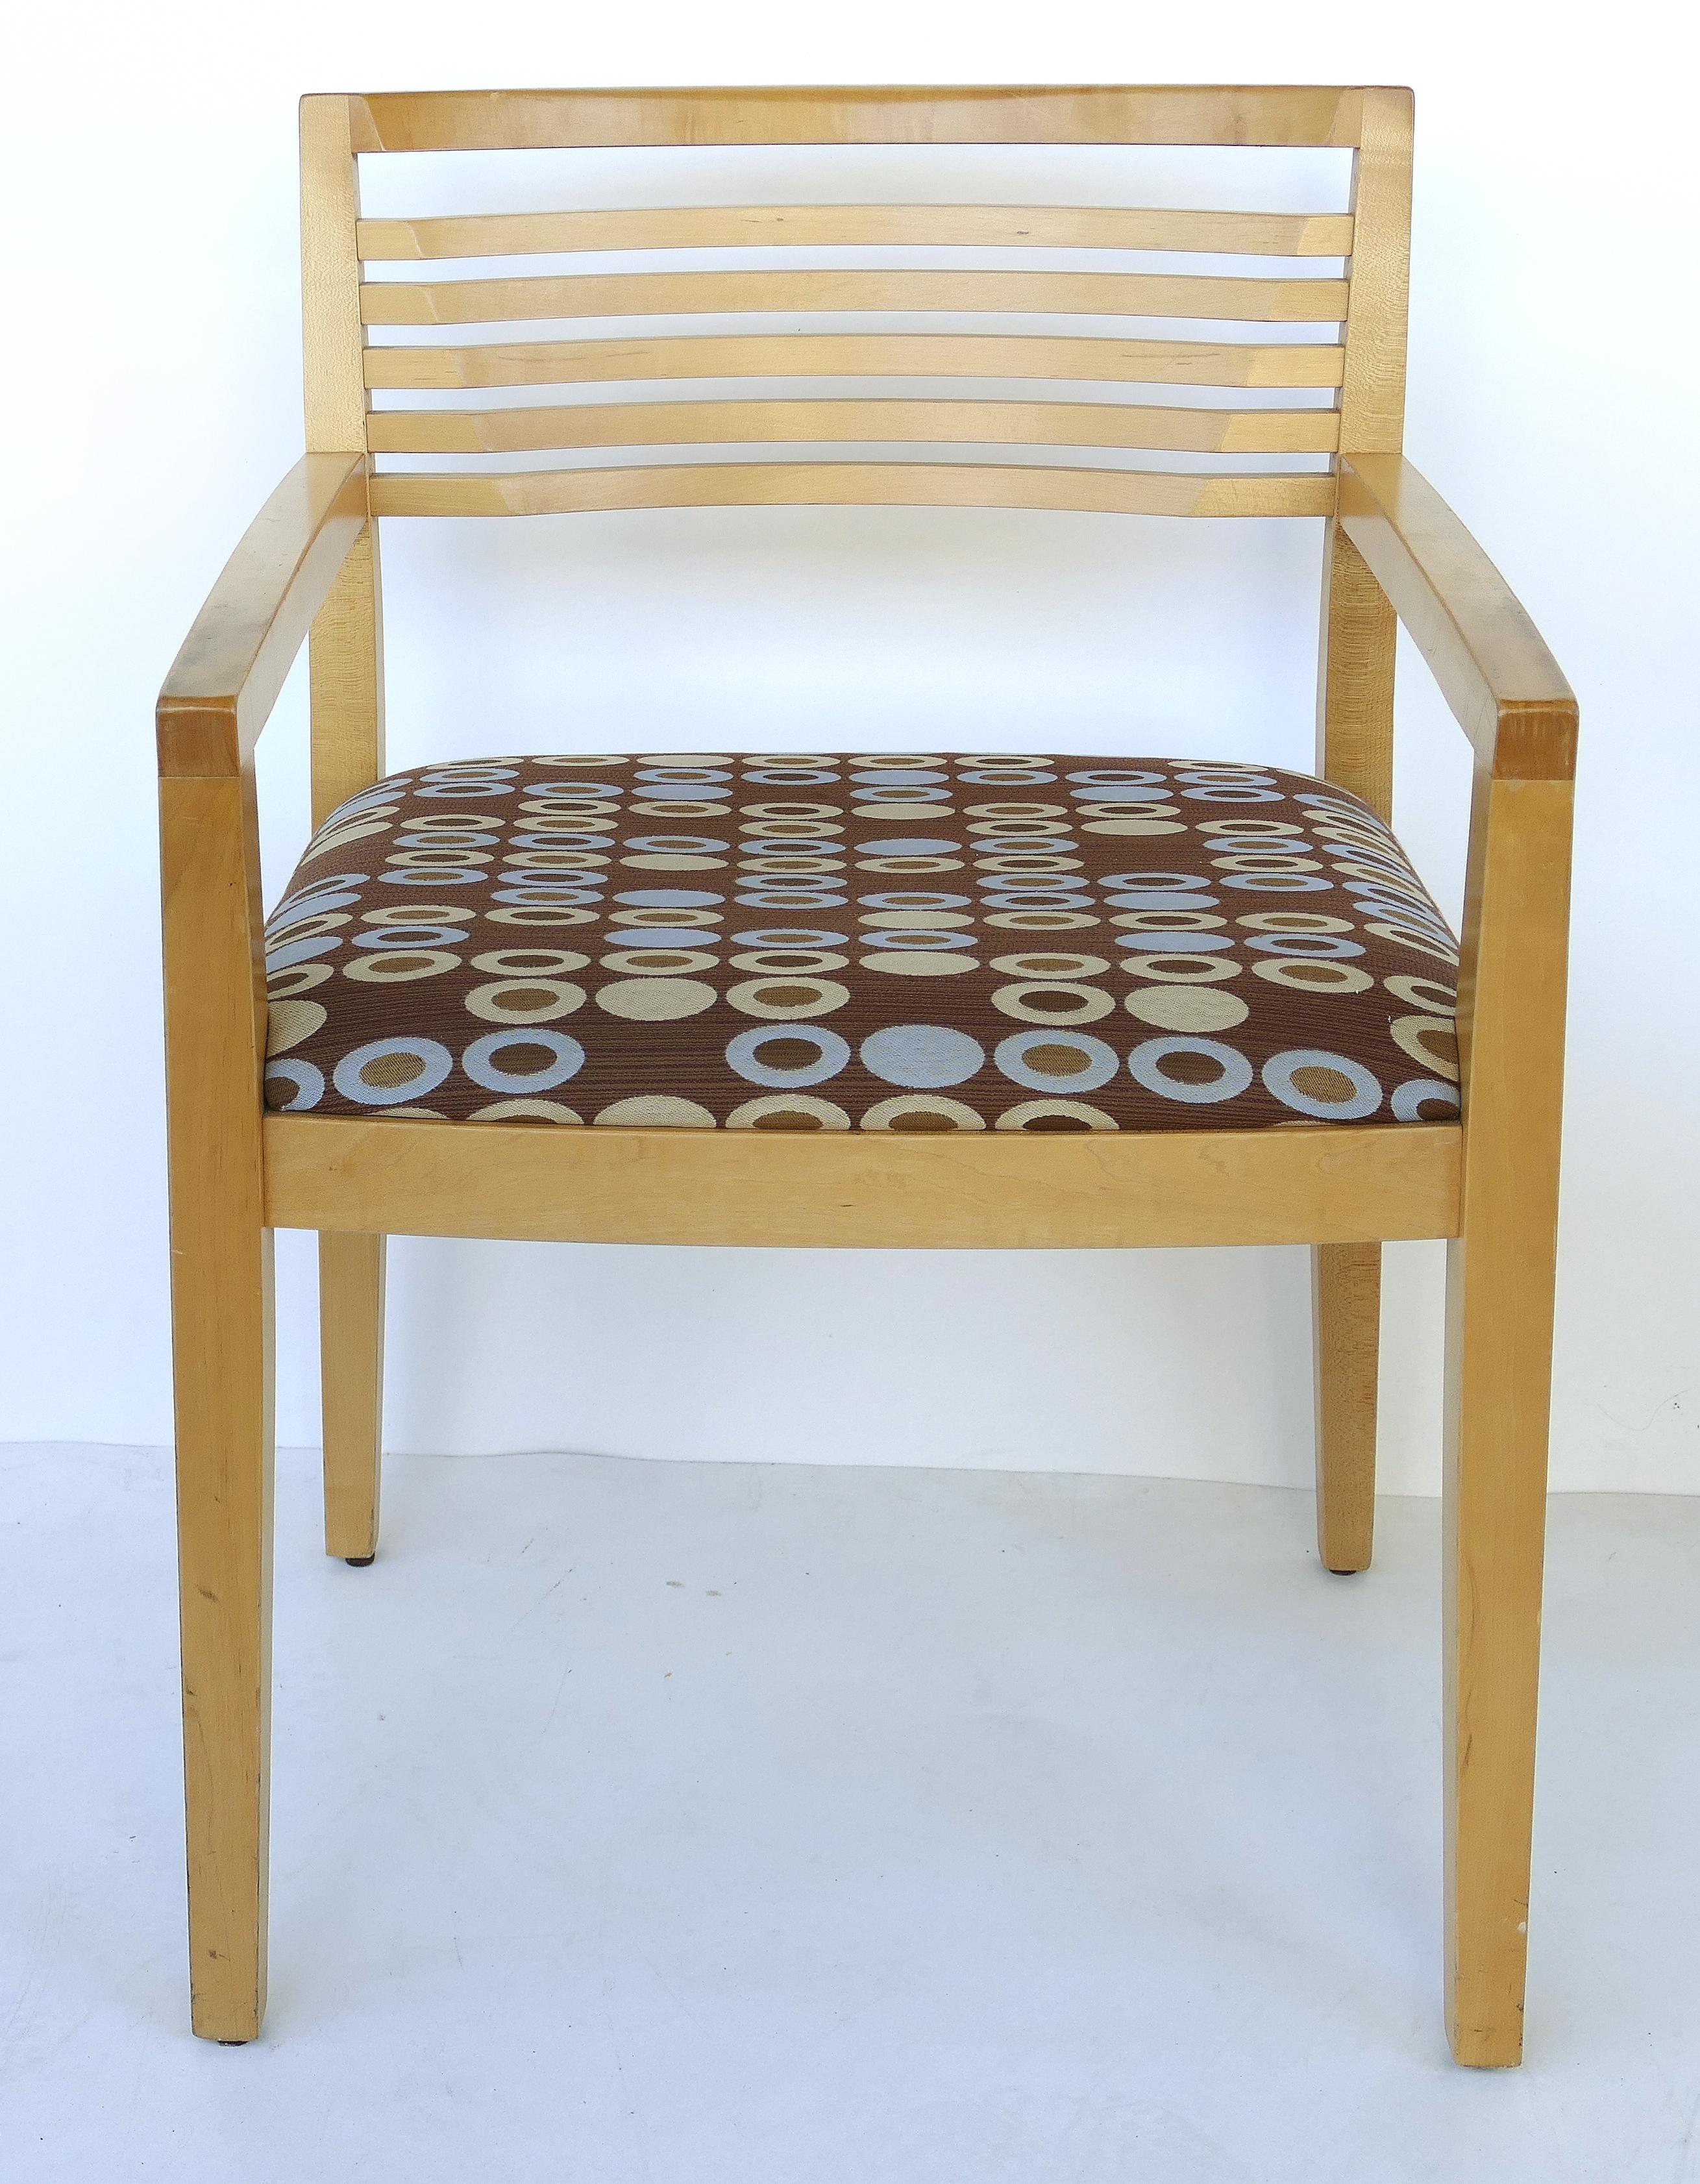 Joseph and Linda Ricchio Knoll Studio Ricchio chairs in beech

Offered for sale is a pair of Knoll Studio Ricchio chairs designed by Joseph and Linda Ricchio in 1990. Both chairs are done in a light beech wood finish and are nicely upholstered.